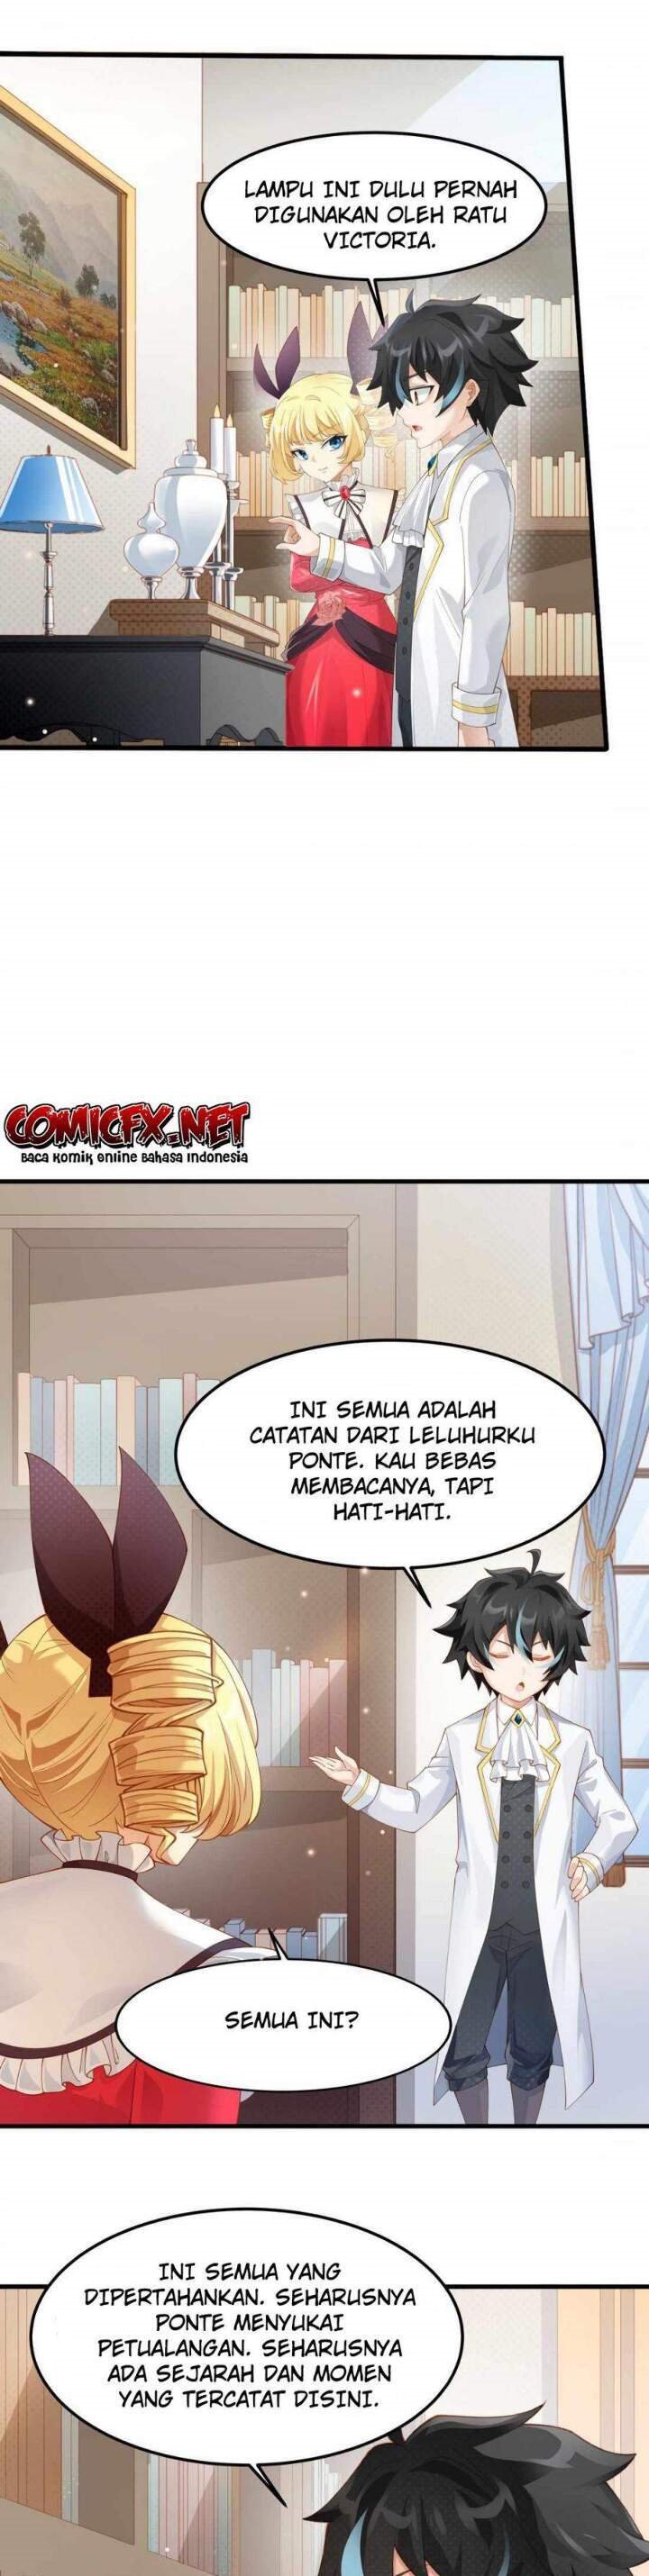 Dilarang COPAS - situs resmi www.mangacanblog.com - Komik little tyrant doesnt want to meet with a bad end 013 - chapter 13 14 Indonesia little tyrant doesnt want to meet with a bad end 013 - chapter 13 Terbaru 10|Baca Manga Komik Indonesia|Mangacan